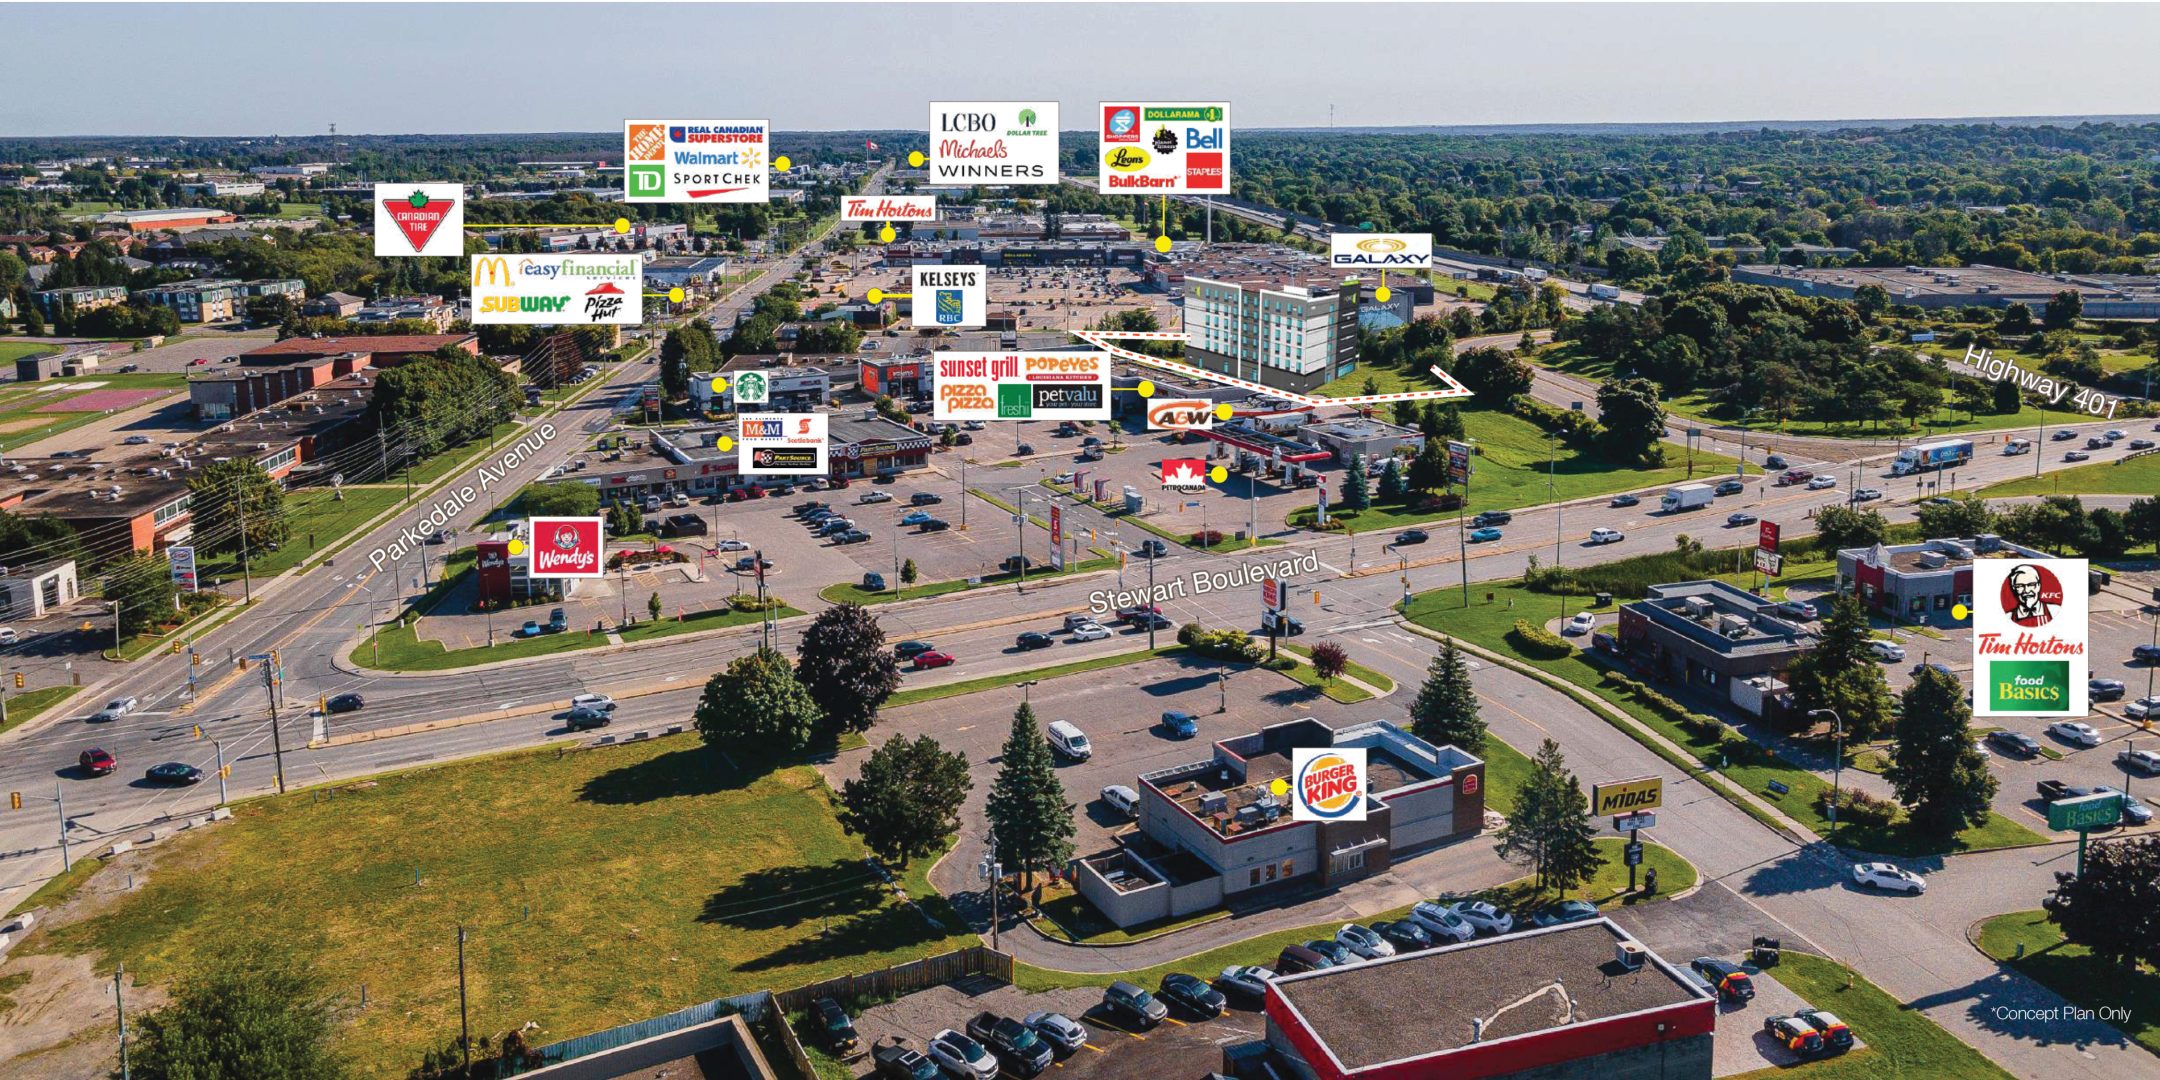 Aerial image of 2 Windsor Drive showcasing all the local businesses in the area